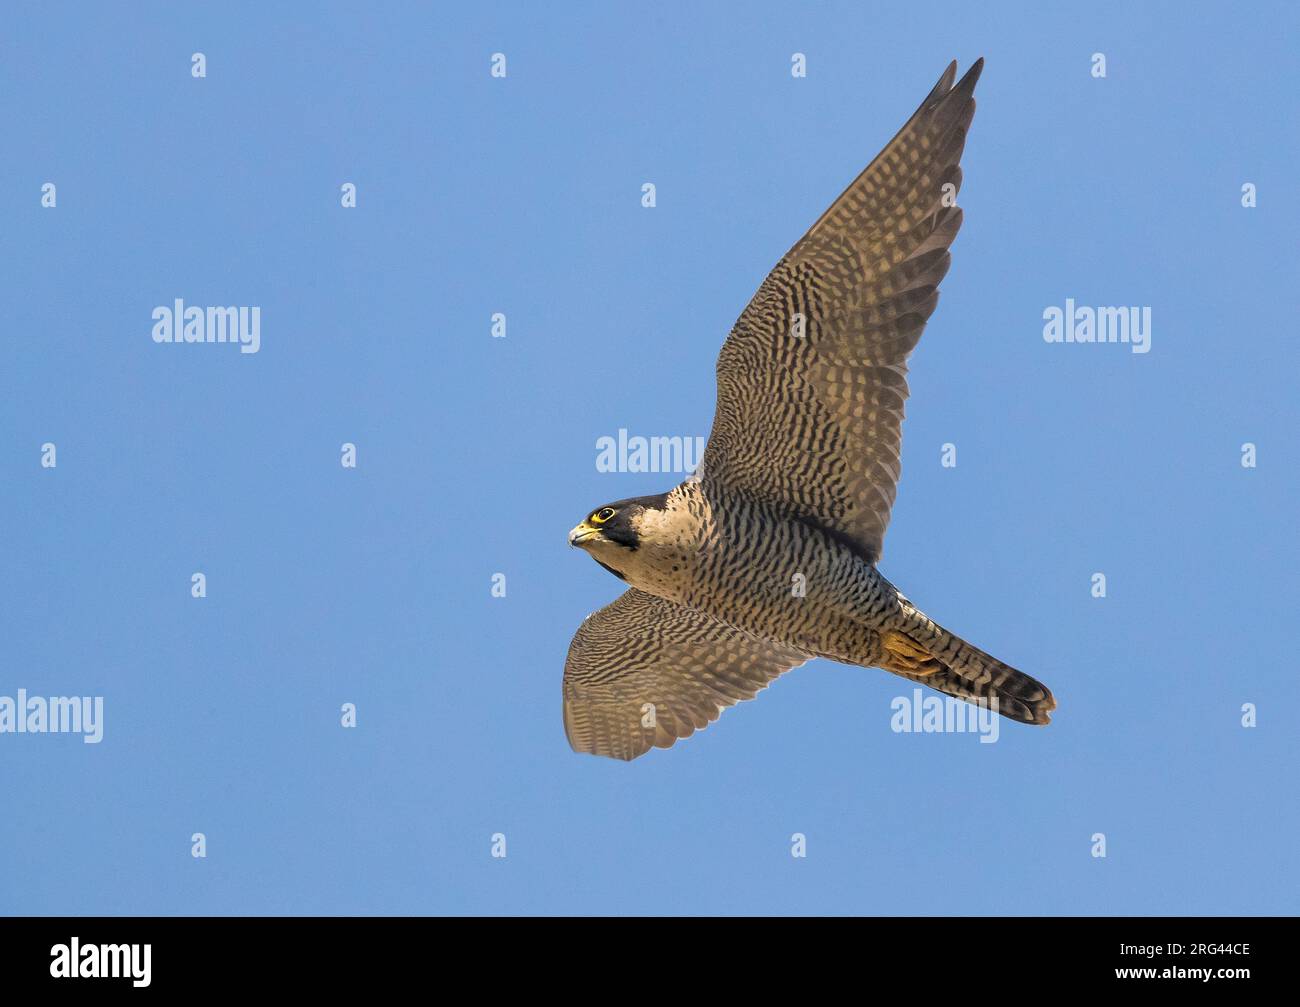 Adult Peregrine Falcon (Falco peregrinus brookei) in flight, seen from below, in Italy. Stock Photo